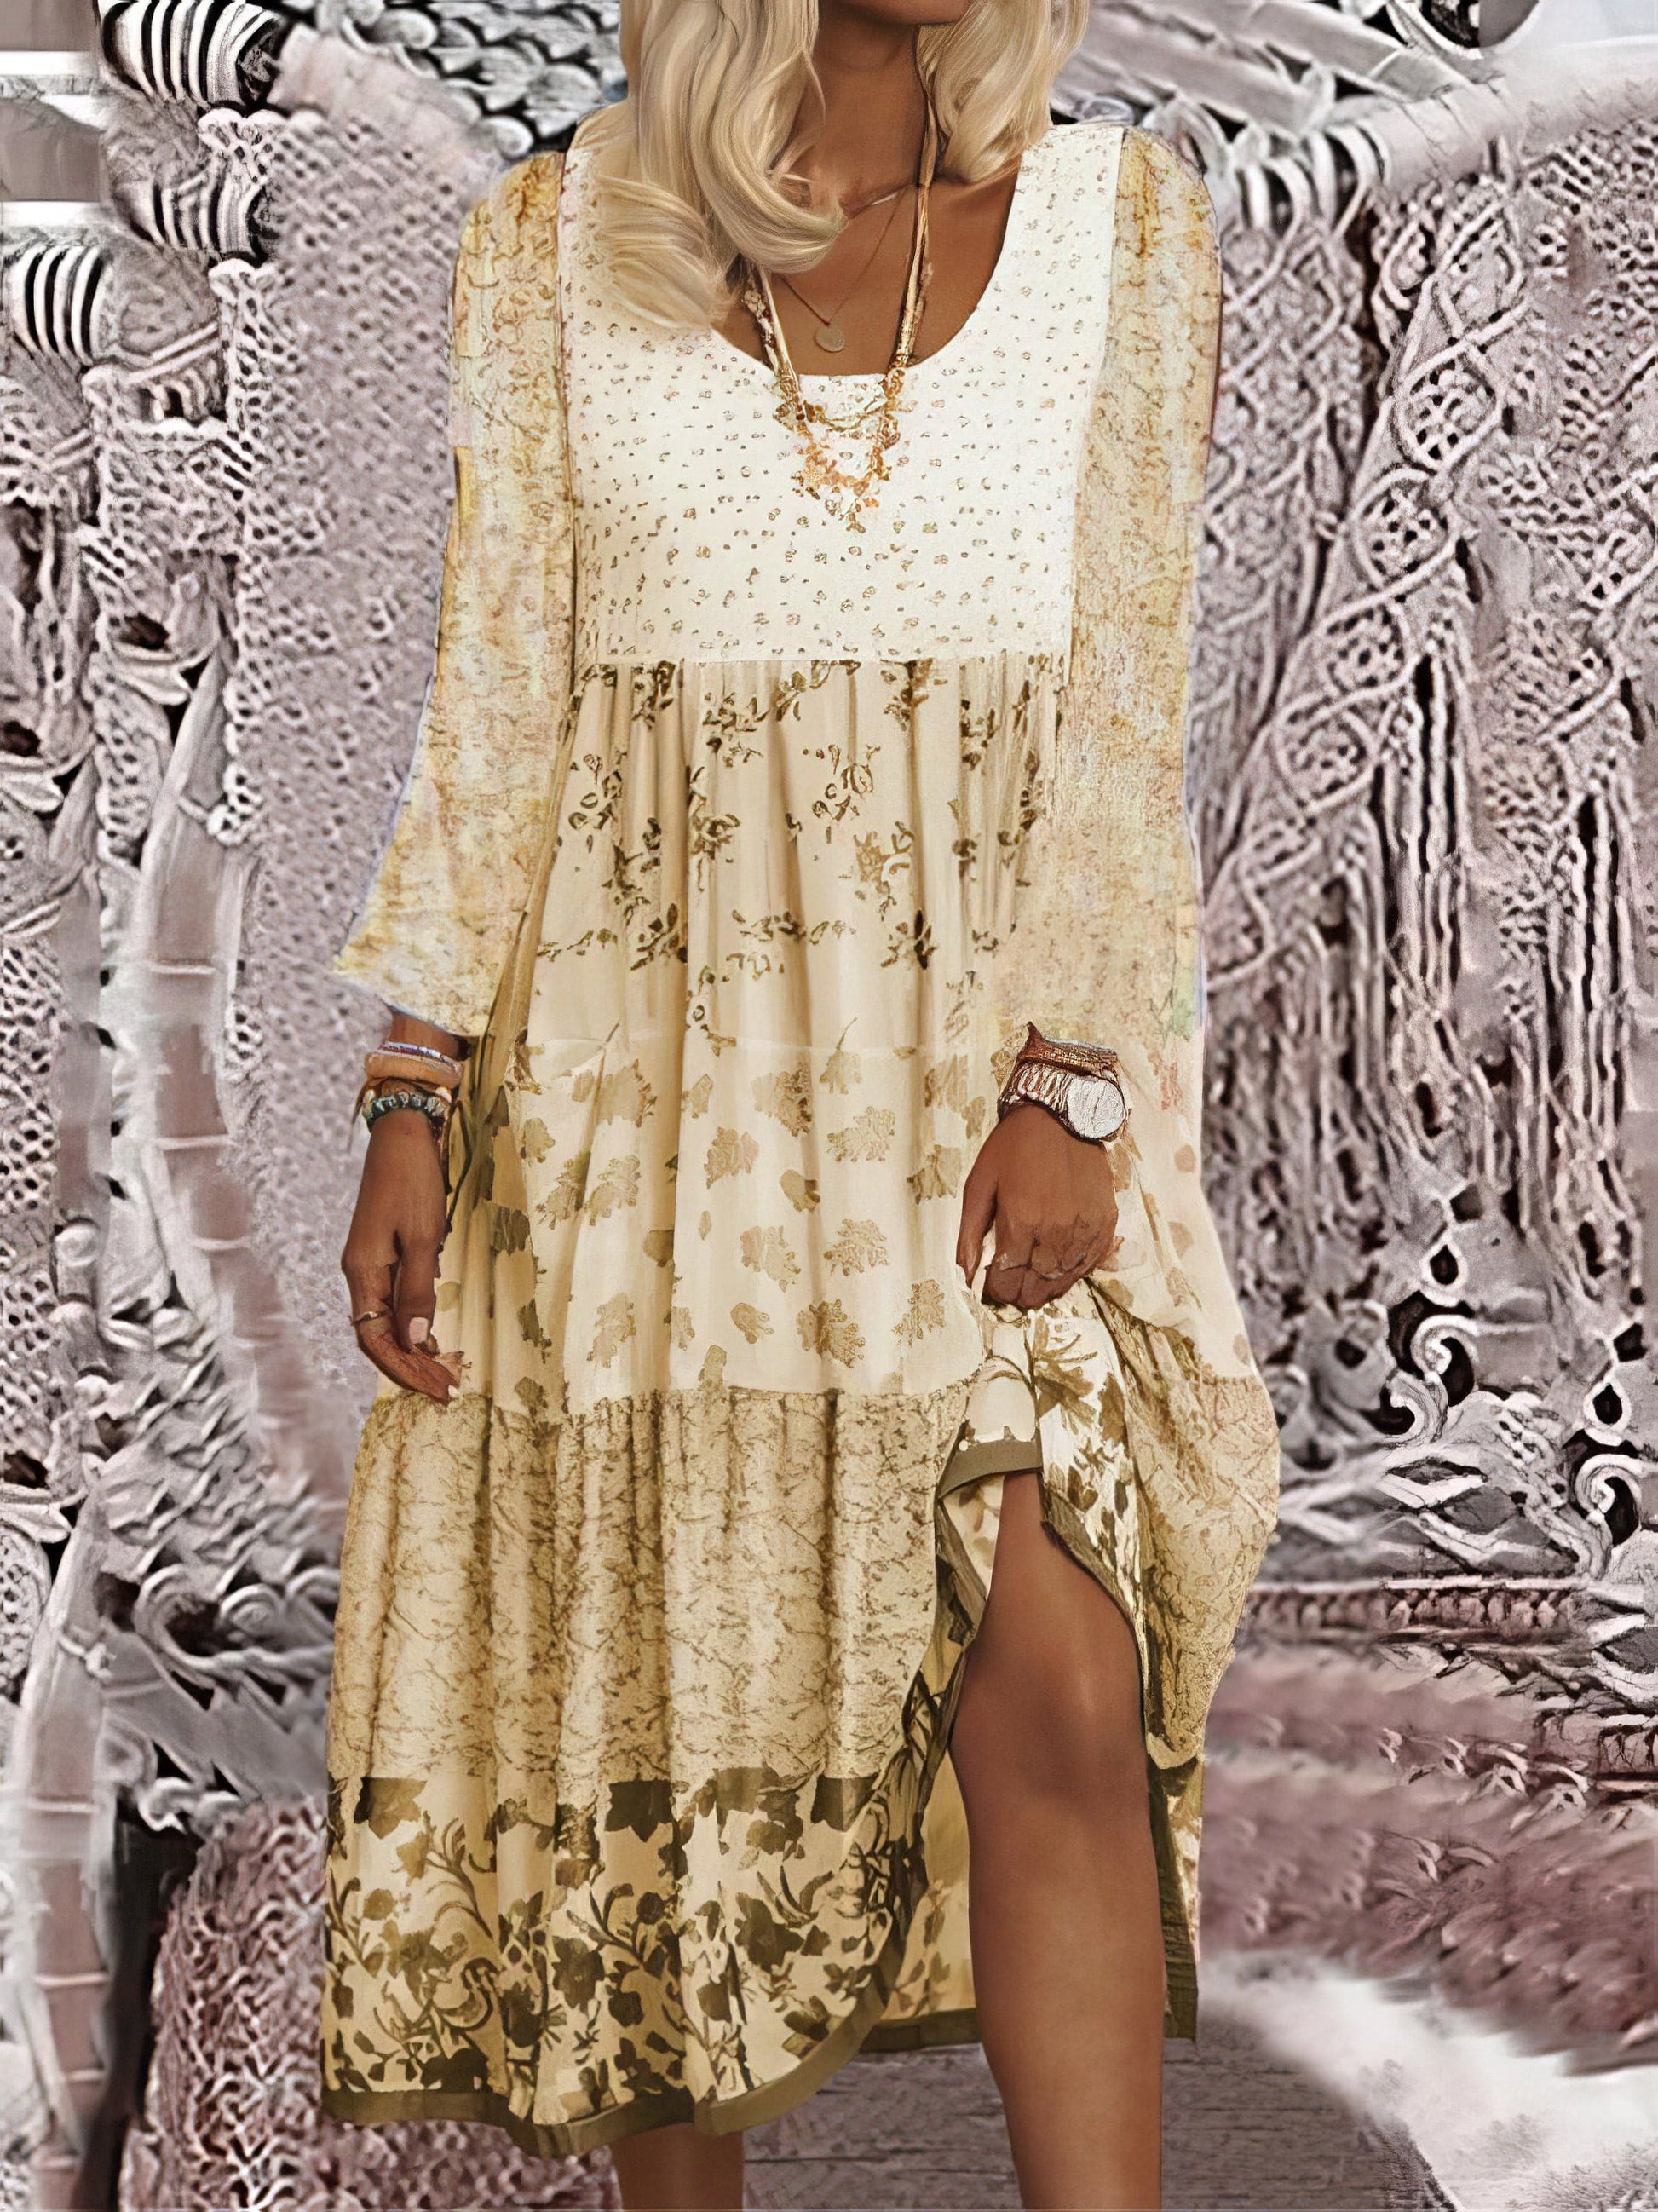 Casual Round Neck Print Long Sleeve Dress